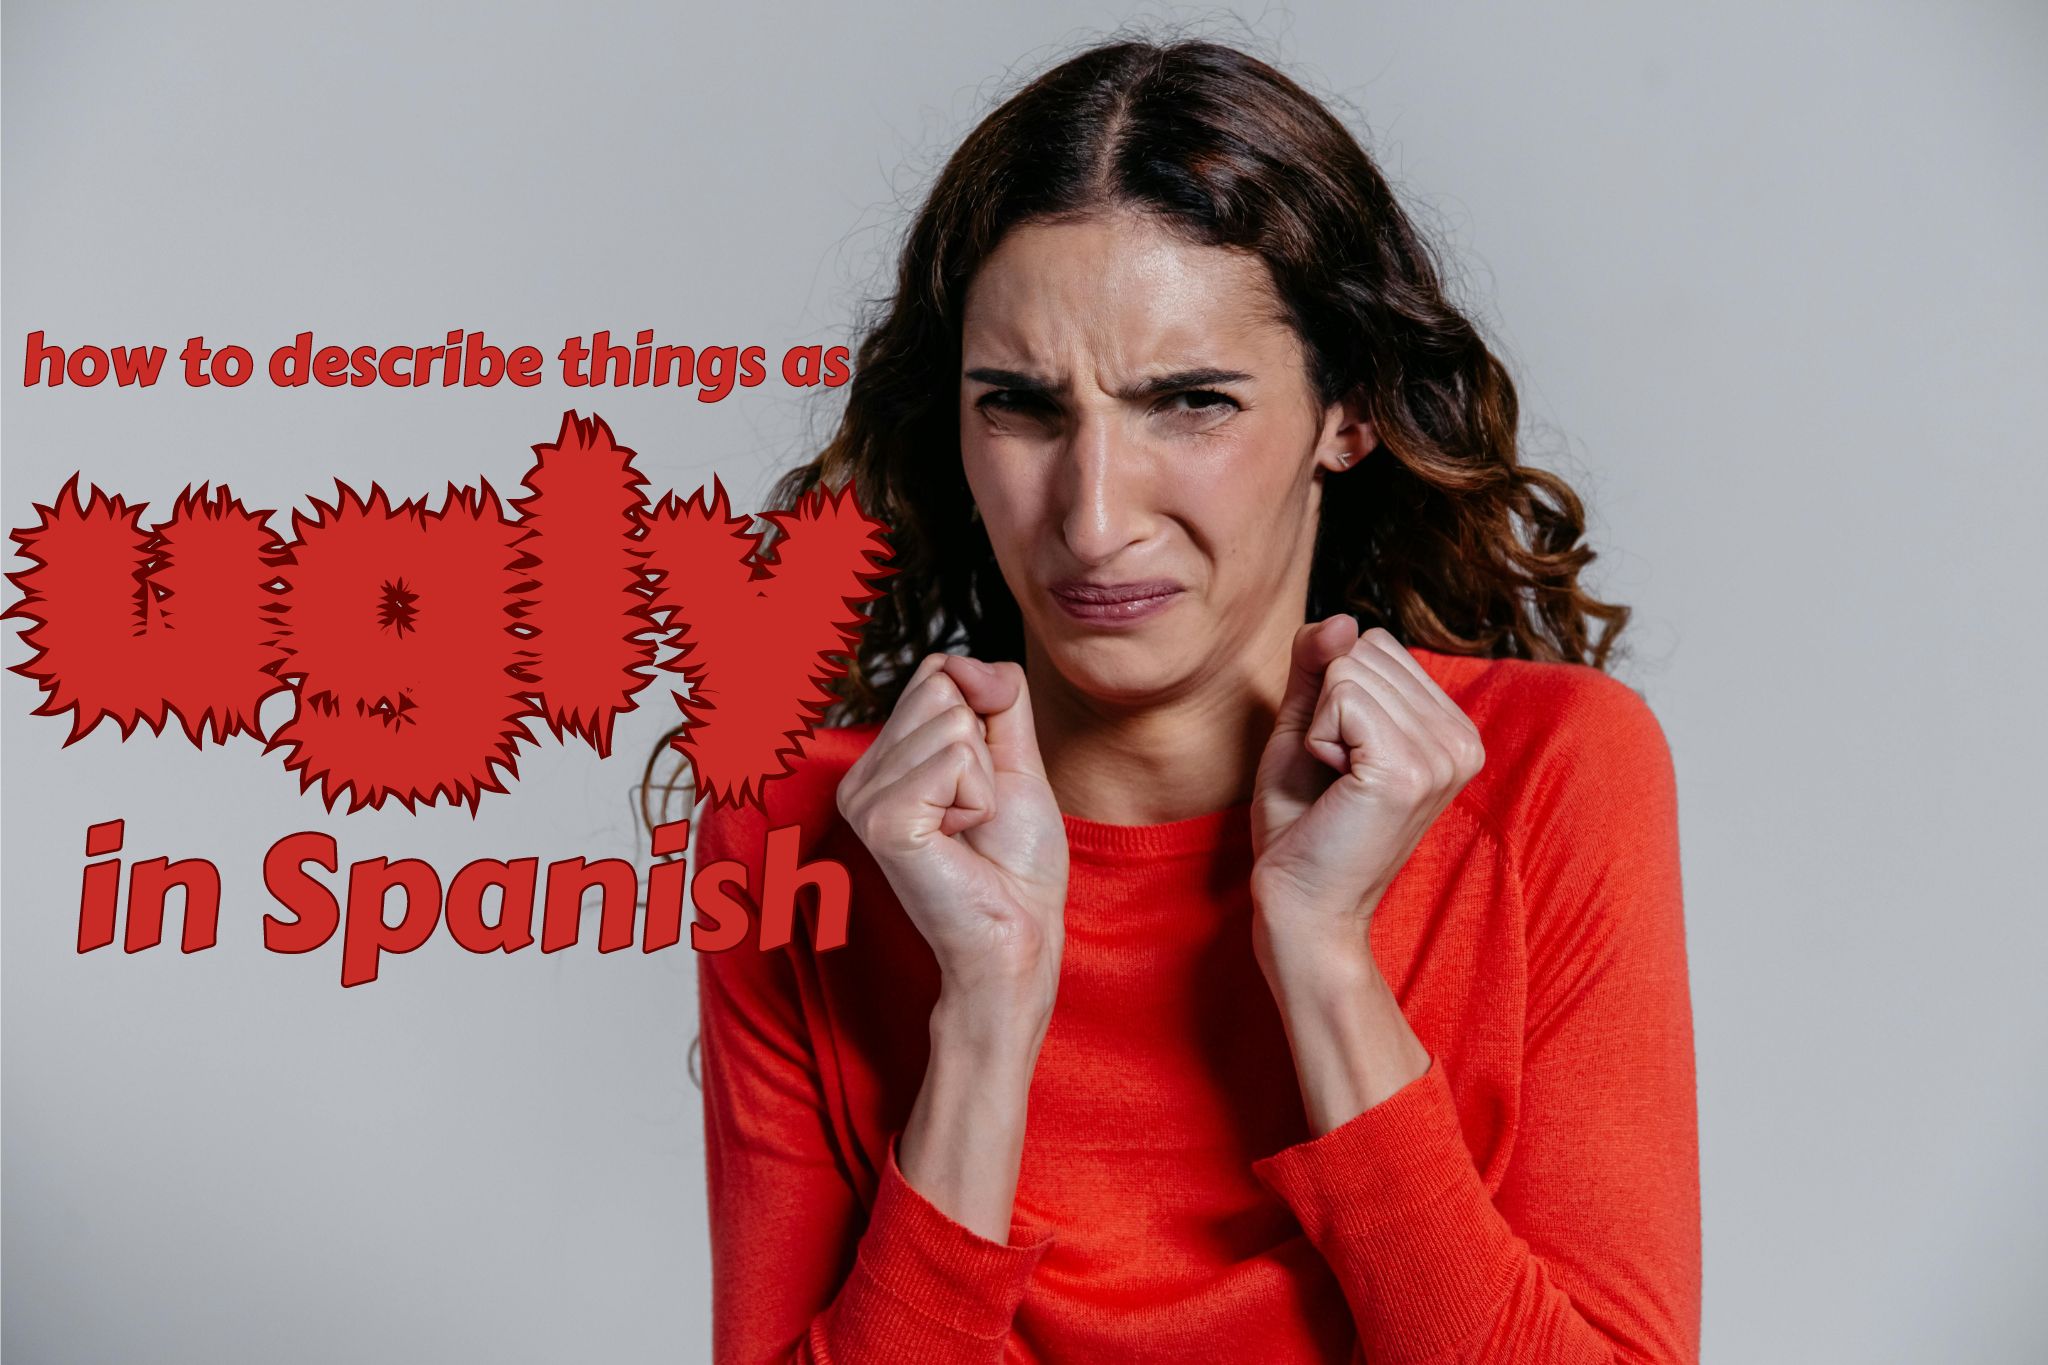 How to describe things as Ugly in Spanish